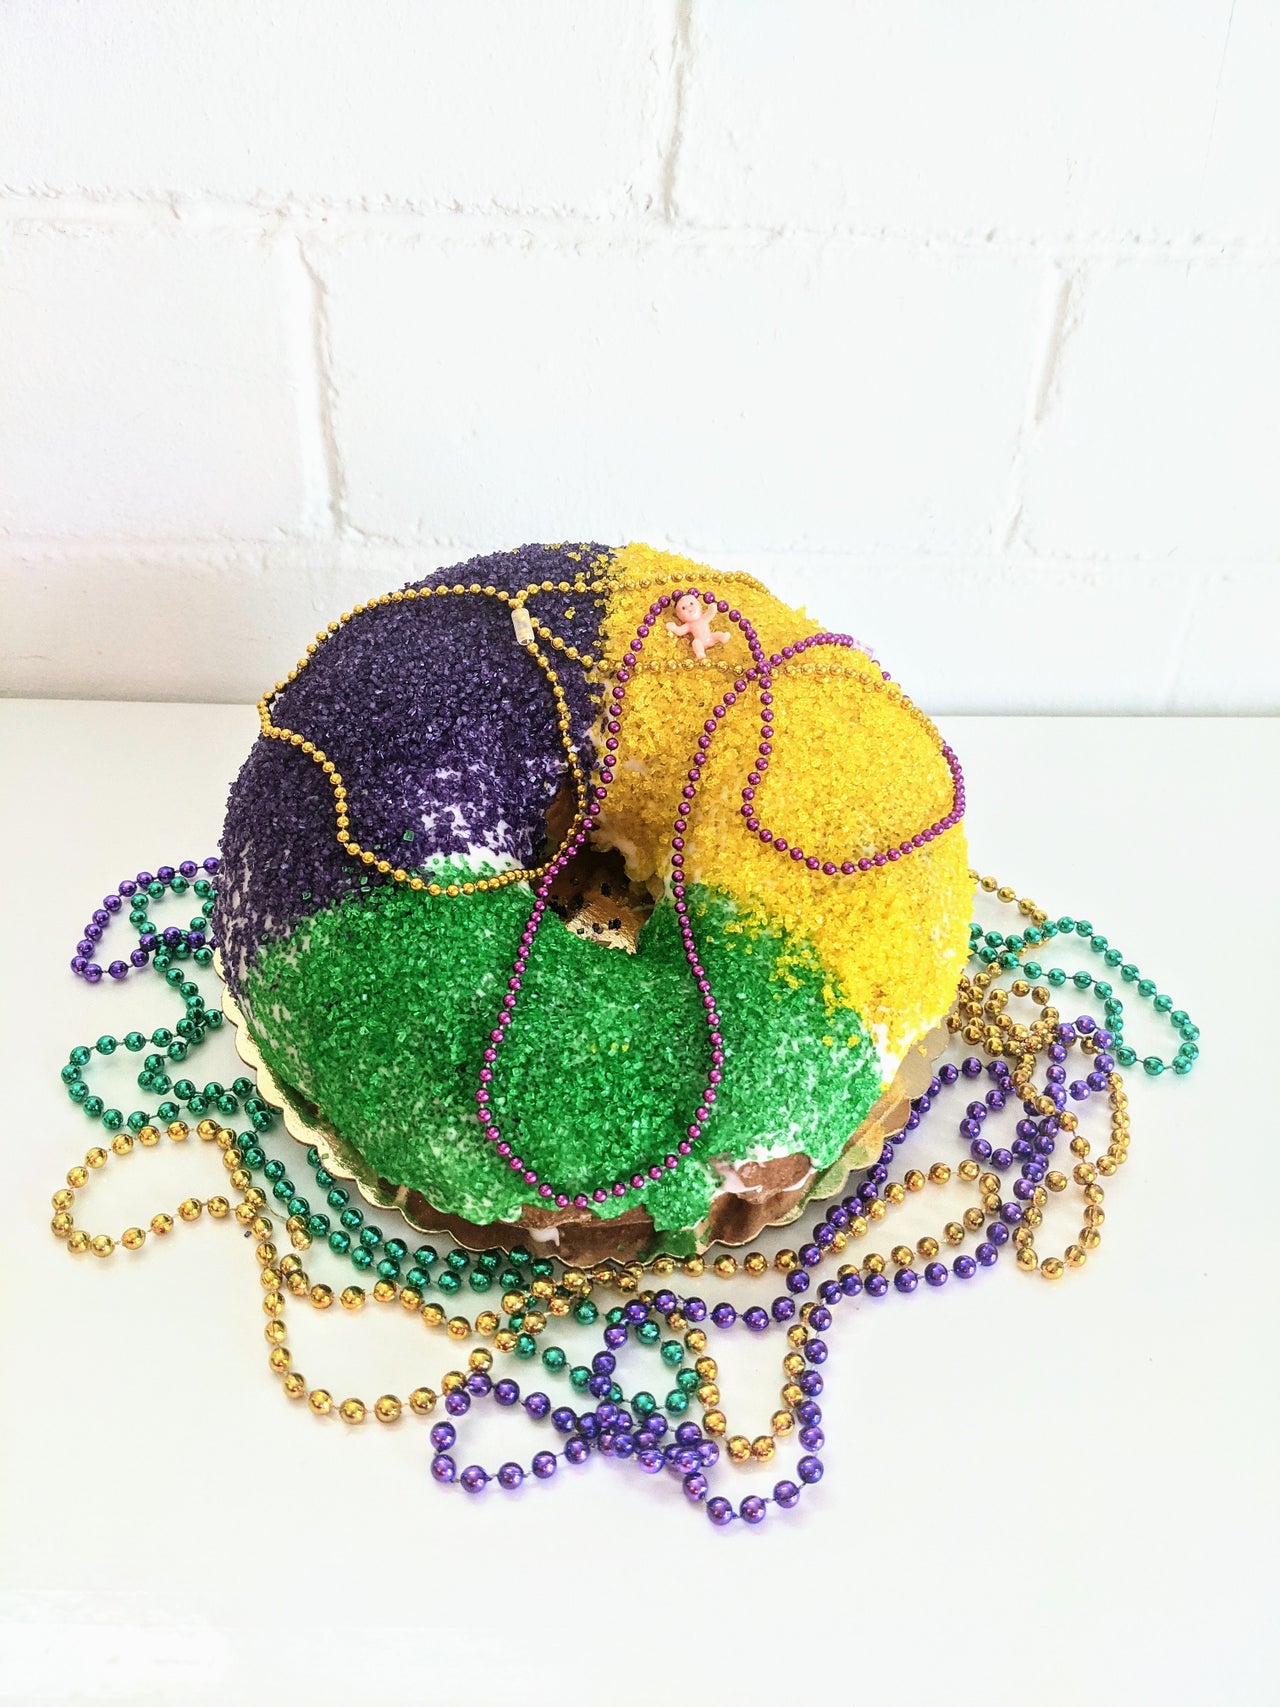 A purple, green, and yellow round cake, with similar colored beaded necklaces on it.